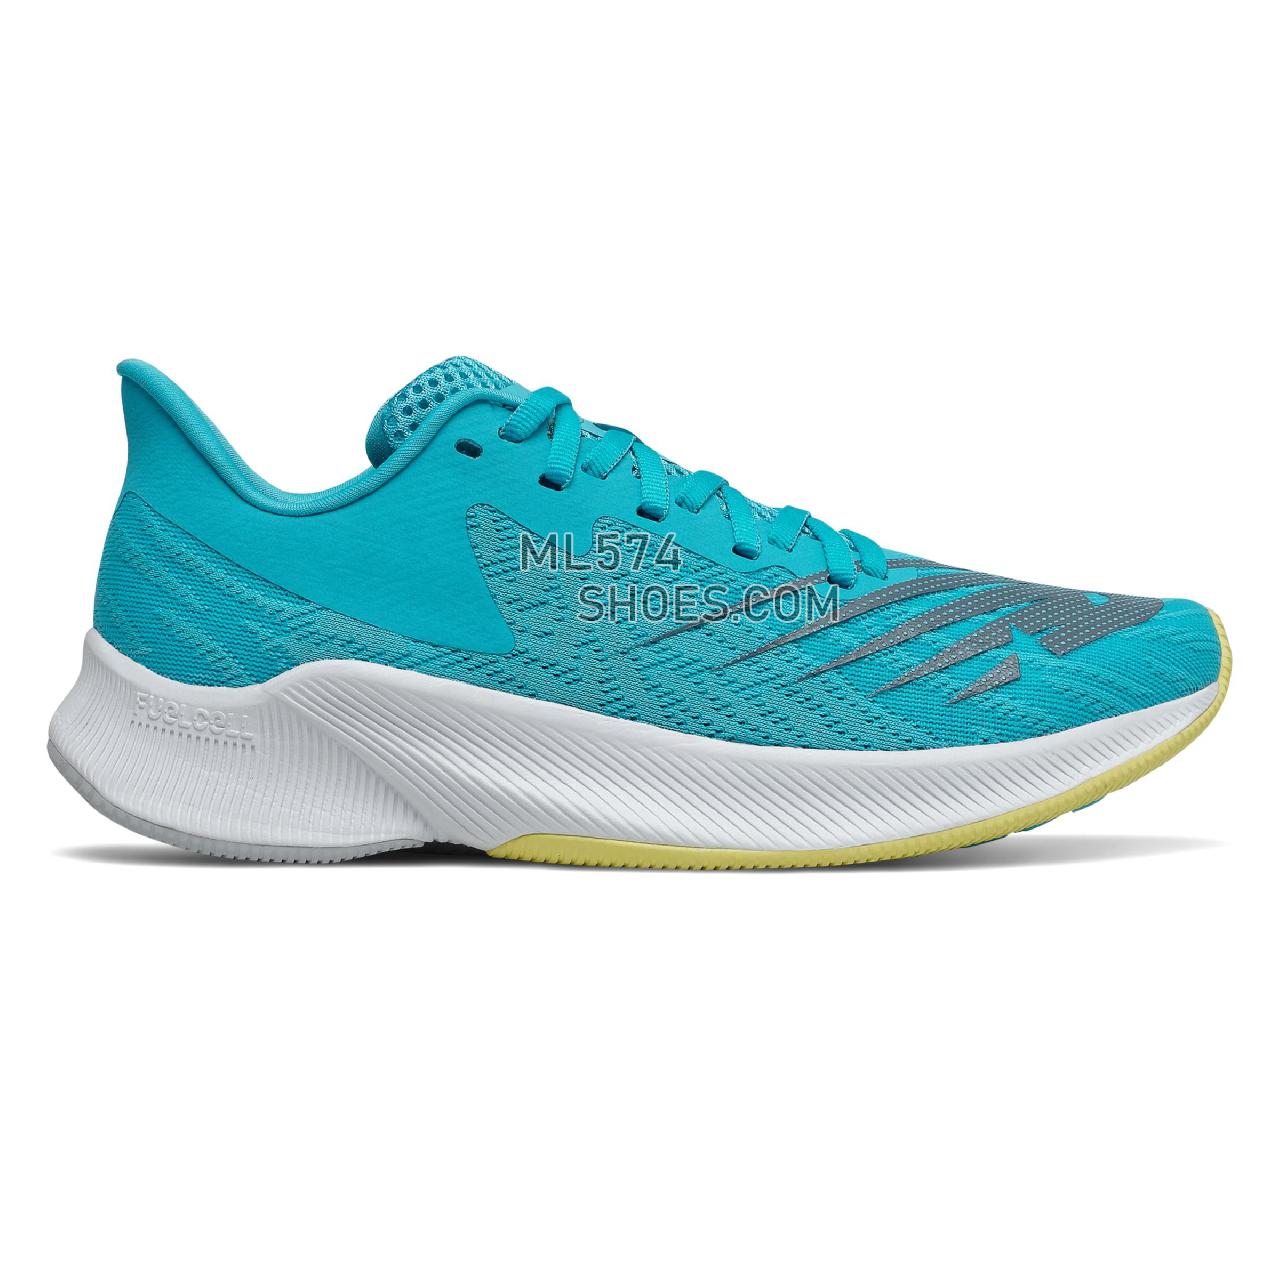 New Balance FuelCell Prism - Women's Stability Running - Virtual Sky with First Light - WFCPZCV